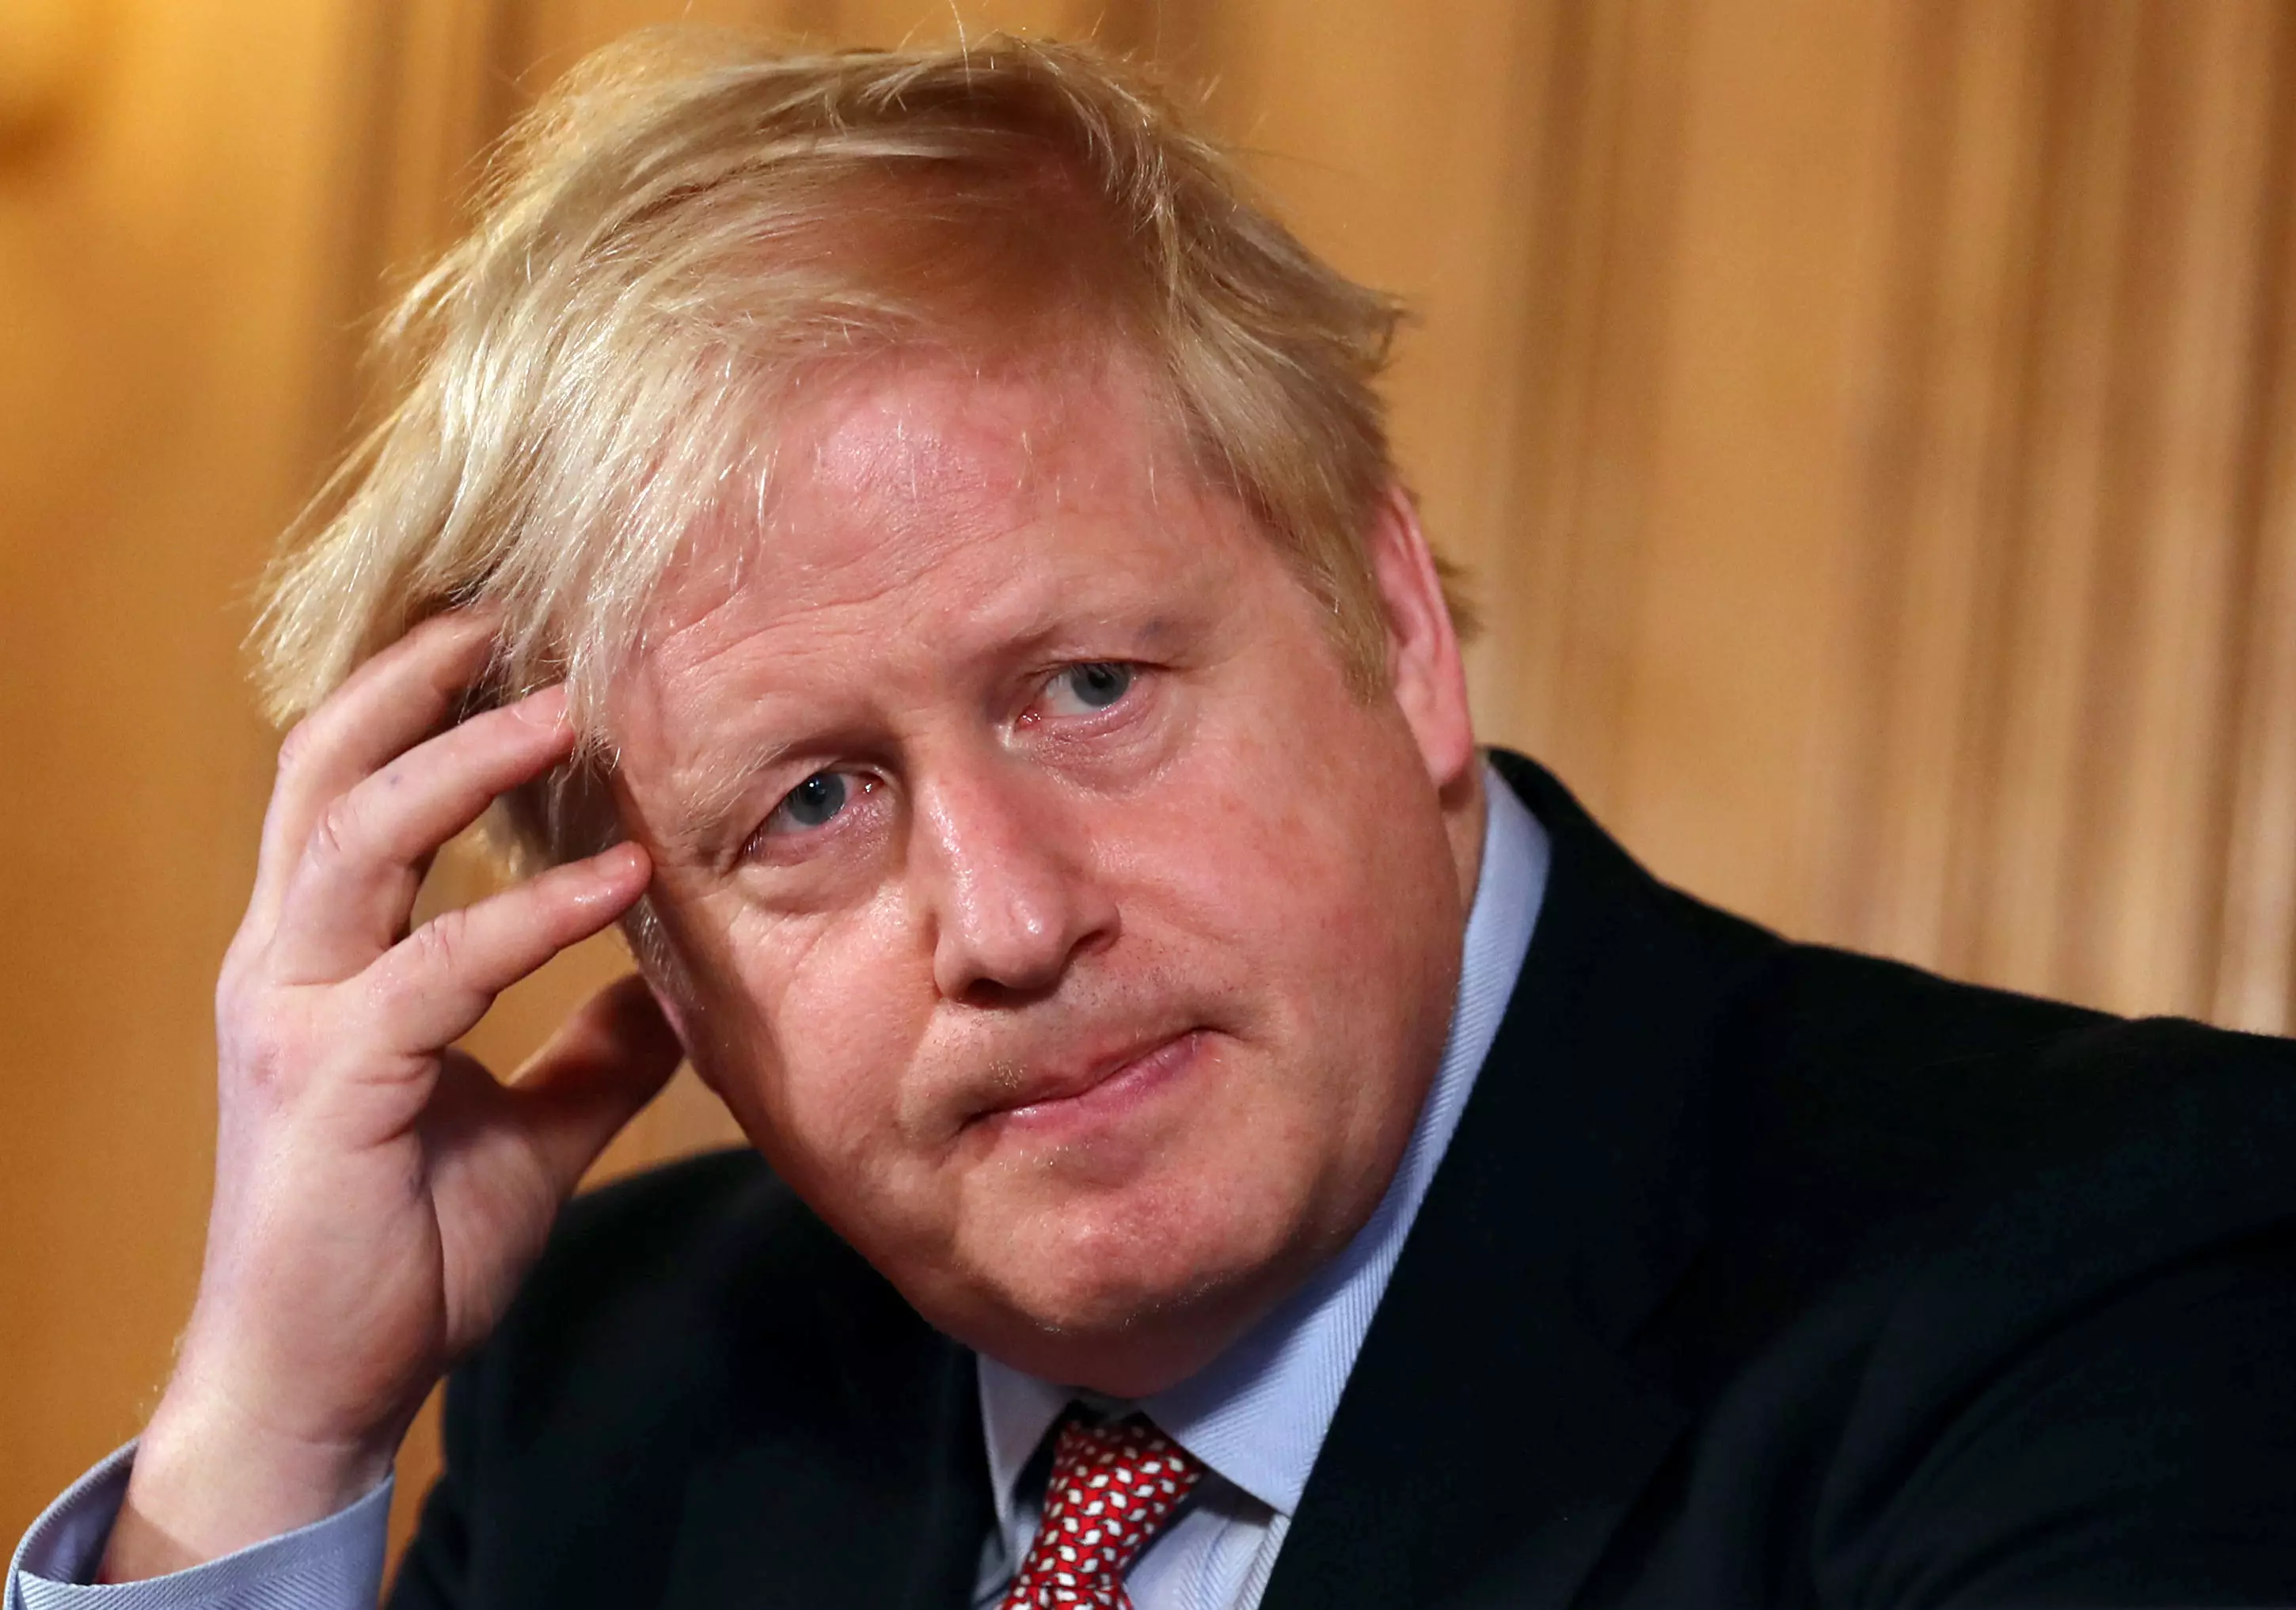 Prime Minister Boris Johnson speaking at a news conference inside 10 Downing Street, London, after the latest COBRA meeting.